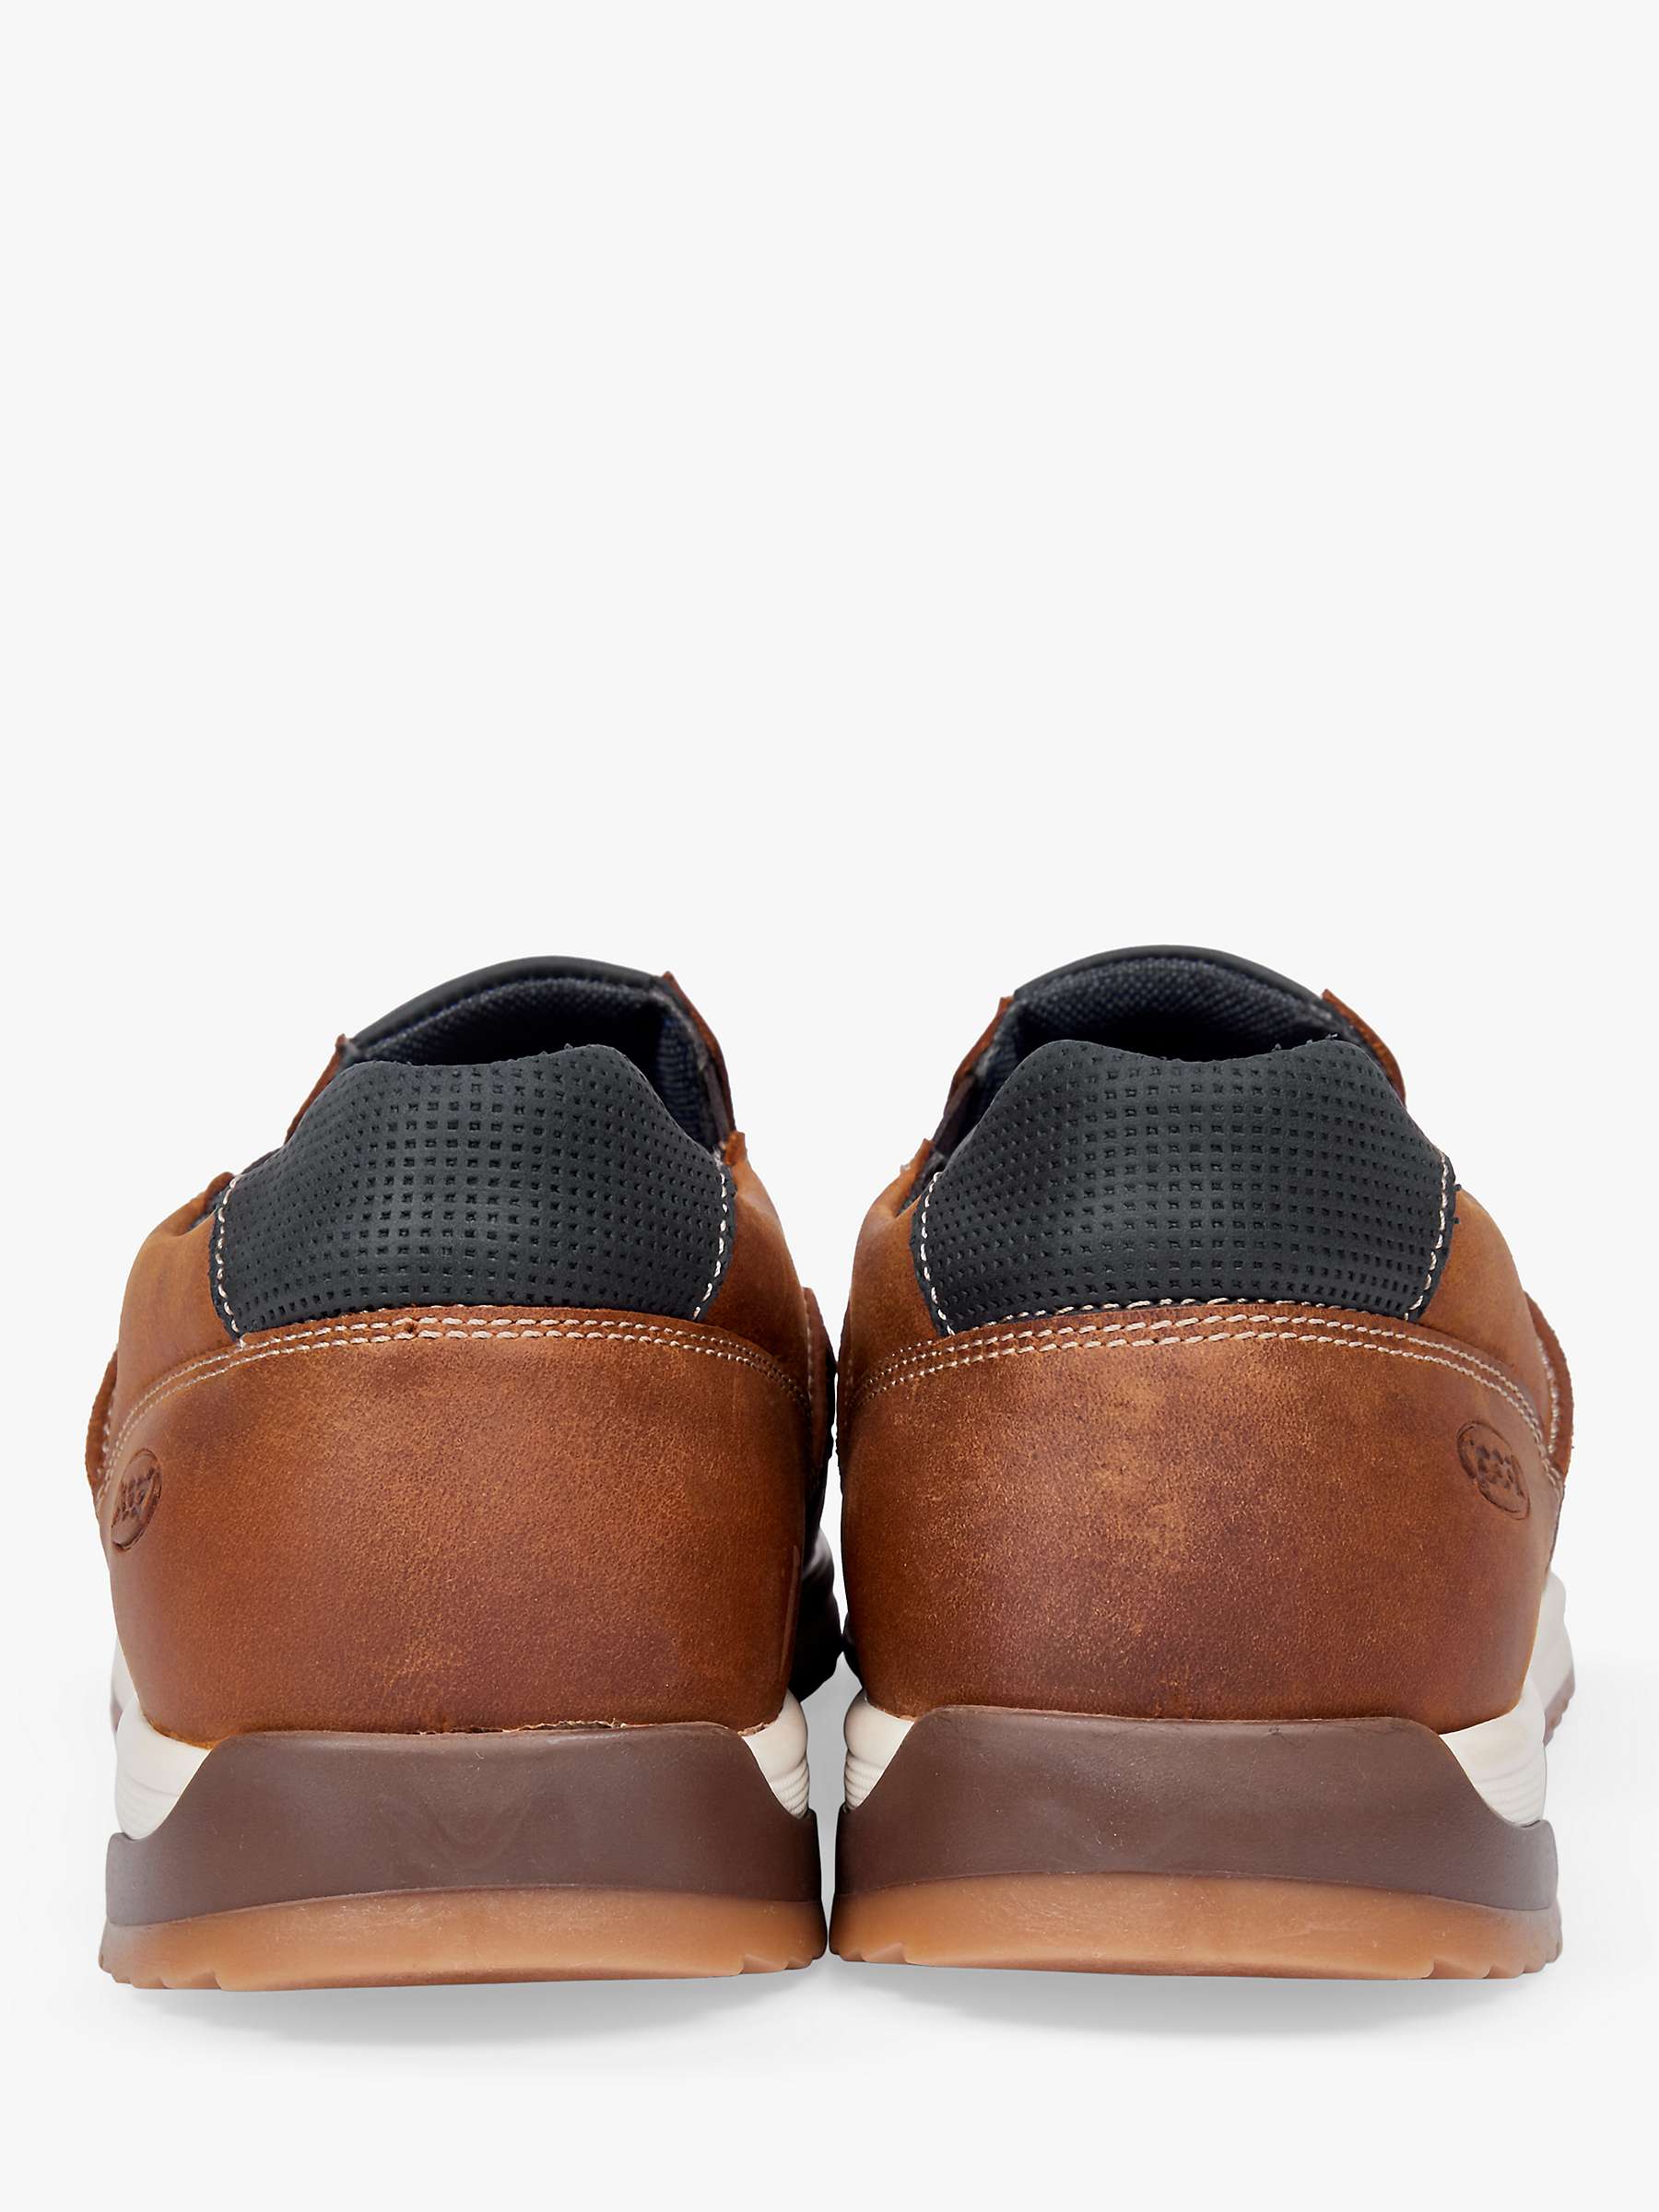 Buy Pod Sean Leather Loafers Online at johnlewis.com